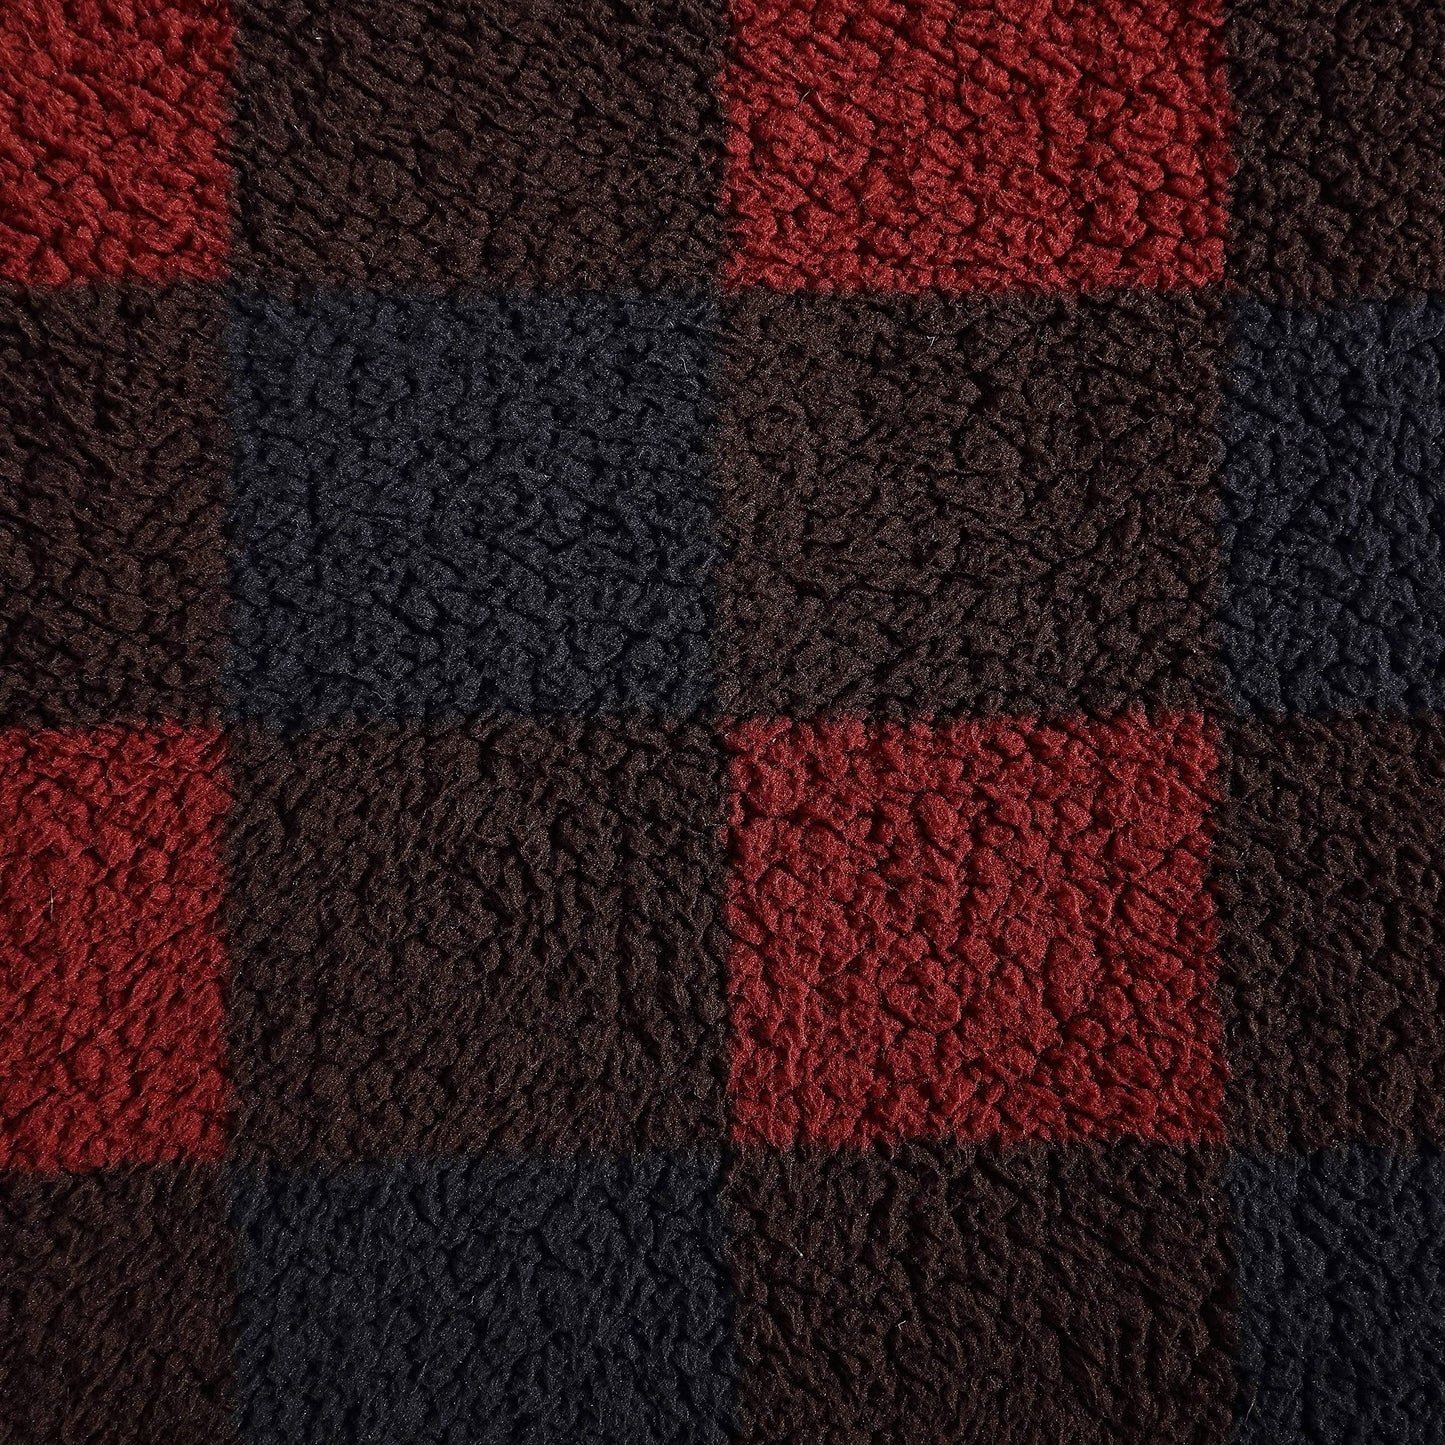 Eddie Bauer - Throw Blanket Reversible  Home Decor for All Seasons (Red/Black)